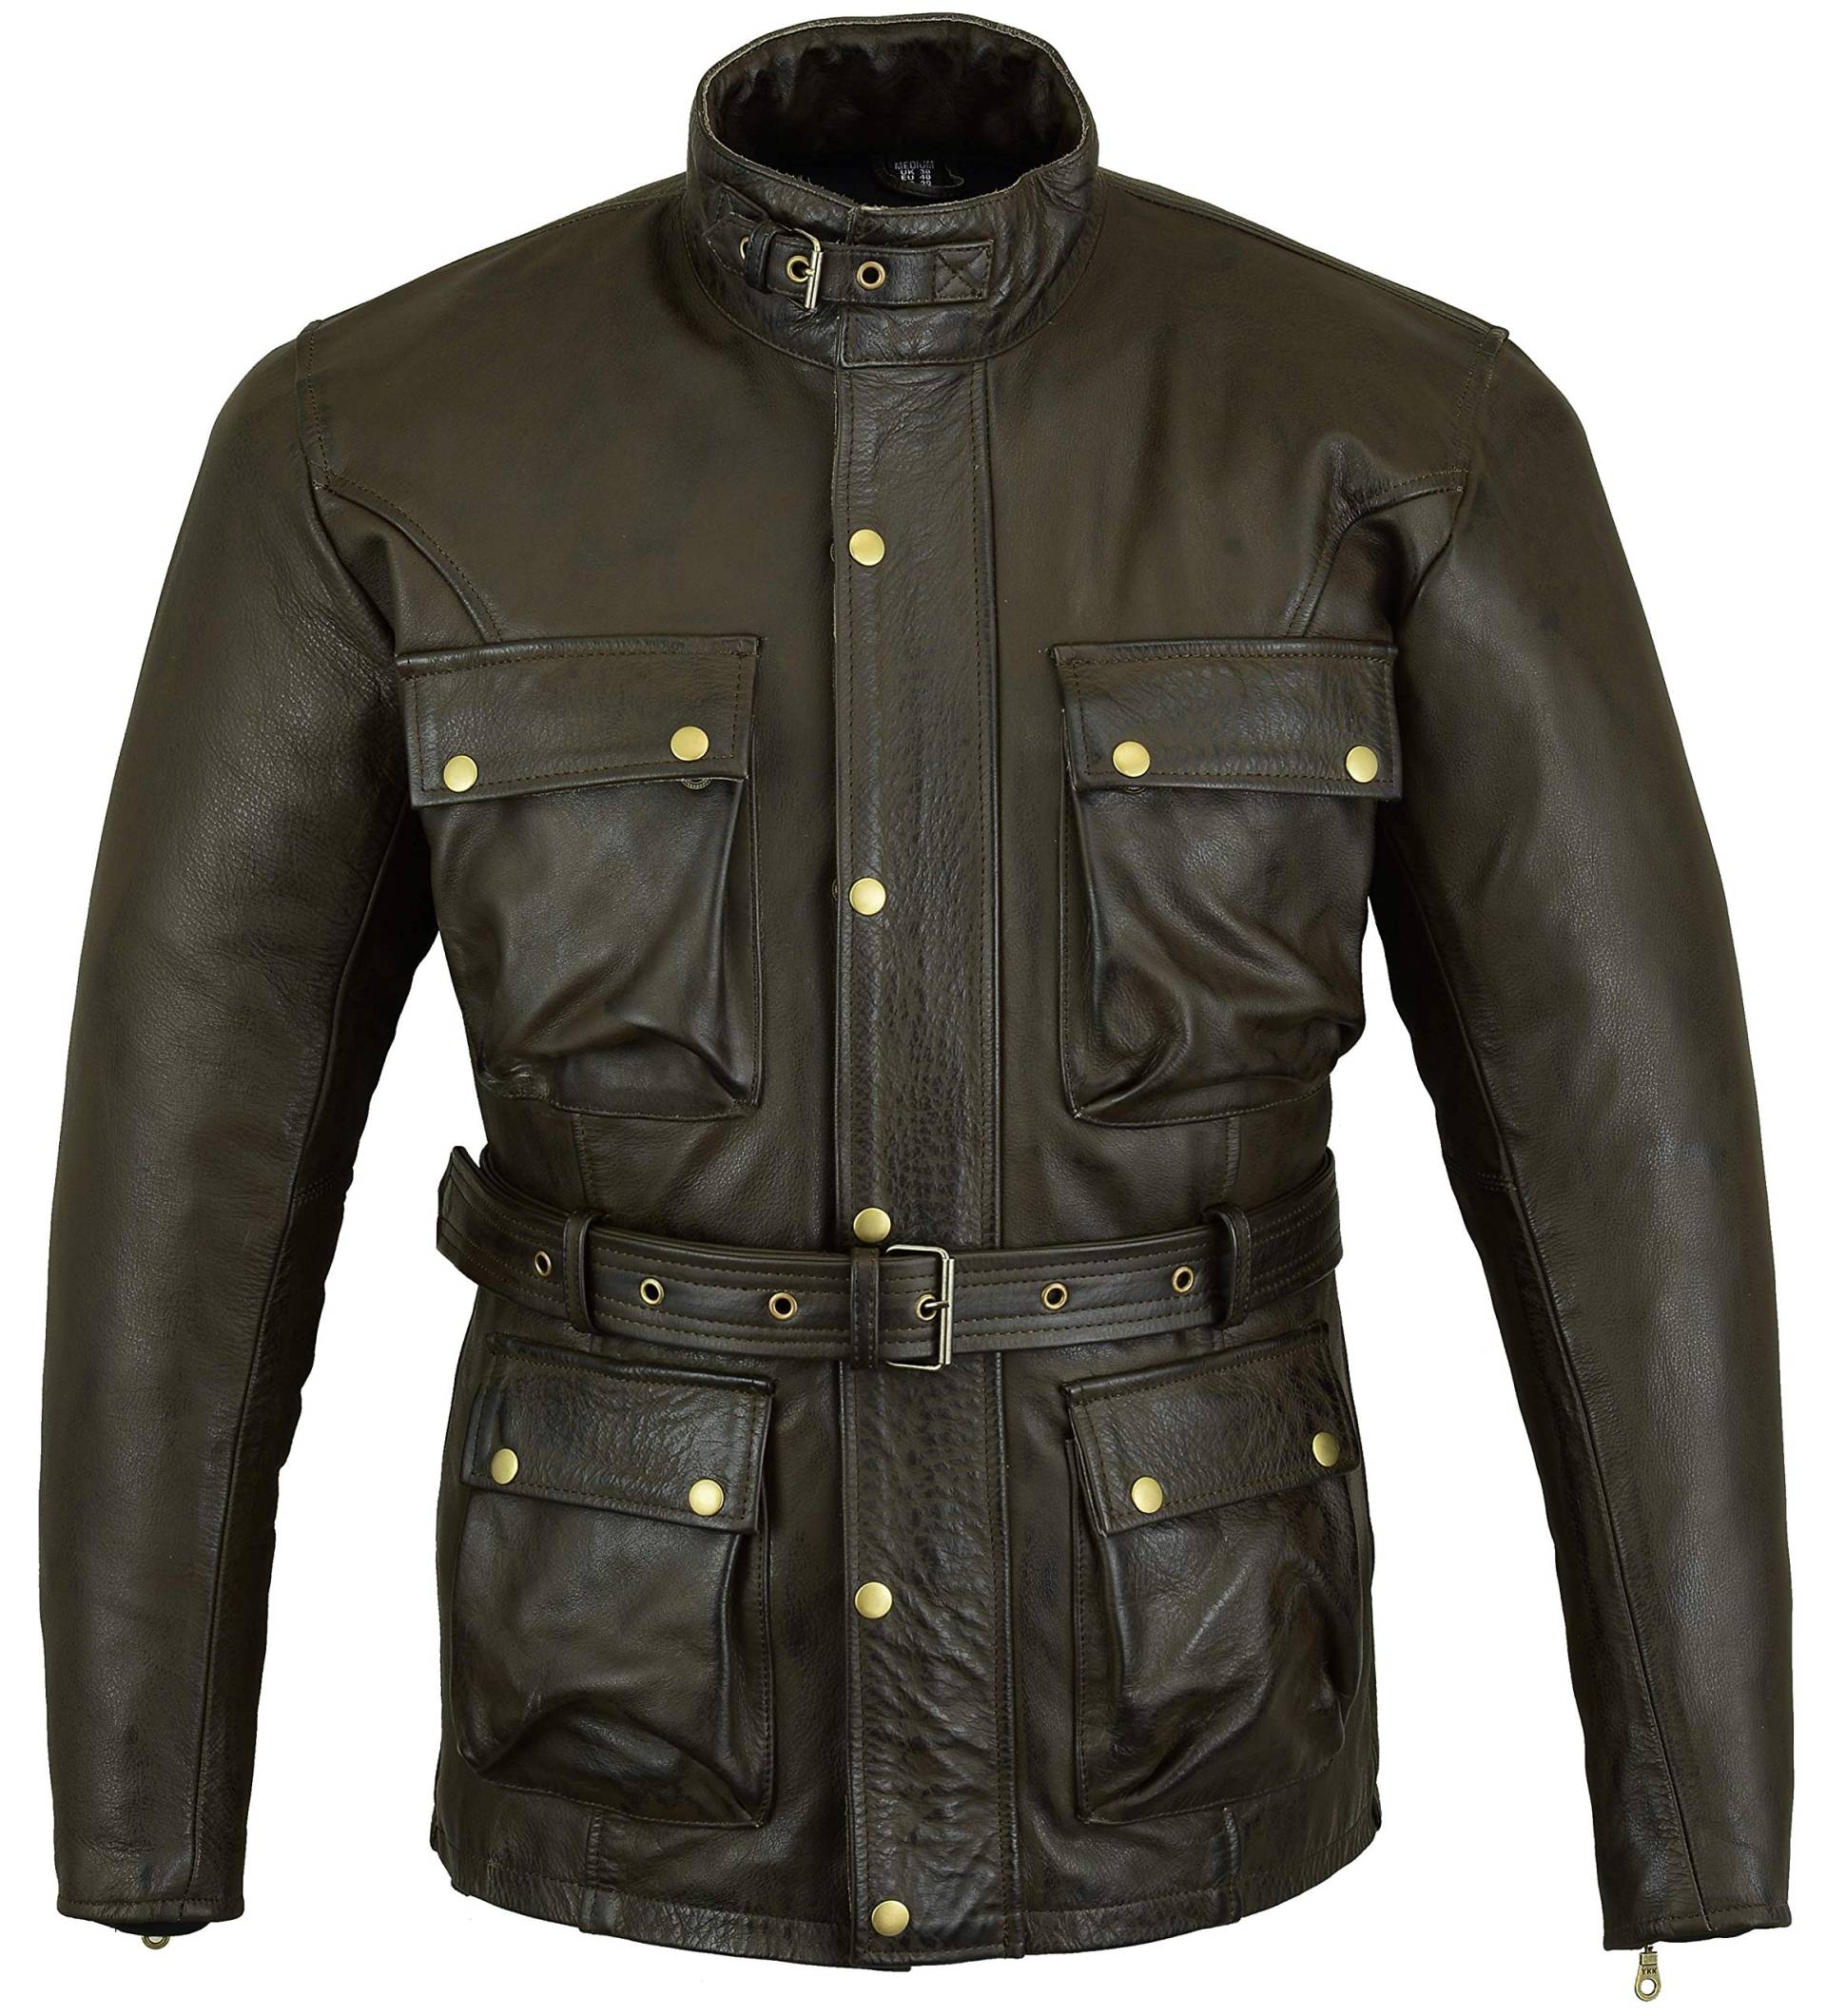 Braun Classic Waxed & Oiled Leather Cowhide Motorcycle Motorbike Jacked Armoured by Bikers Gear UK, Braun, L von Bikers Gear